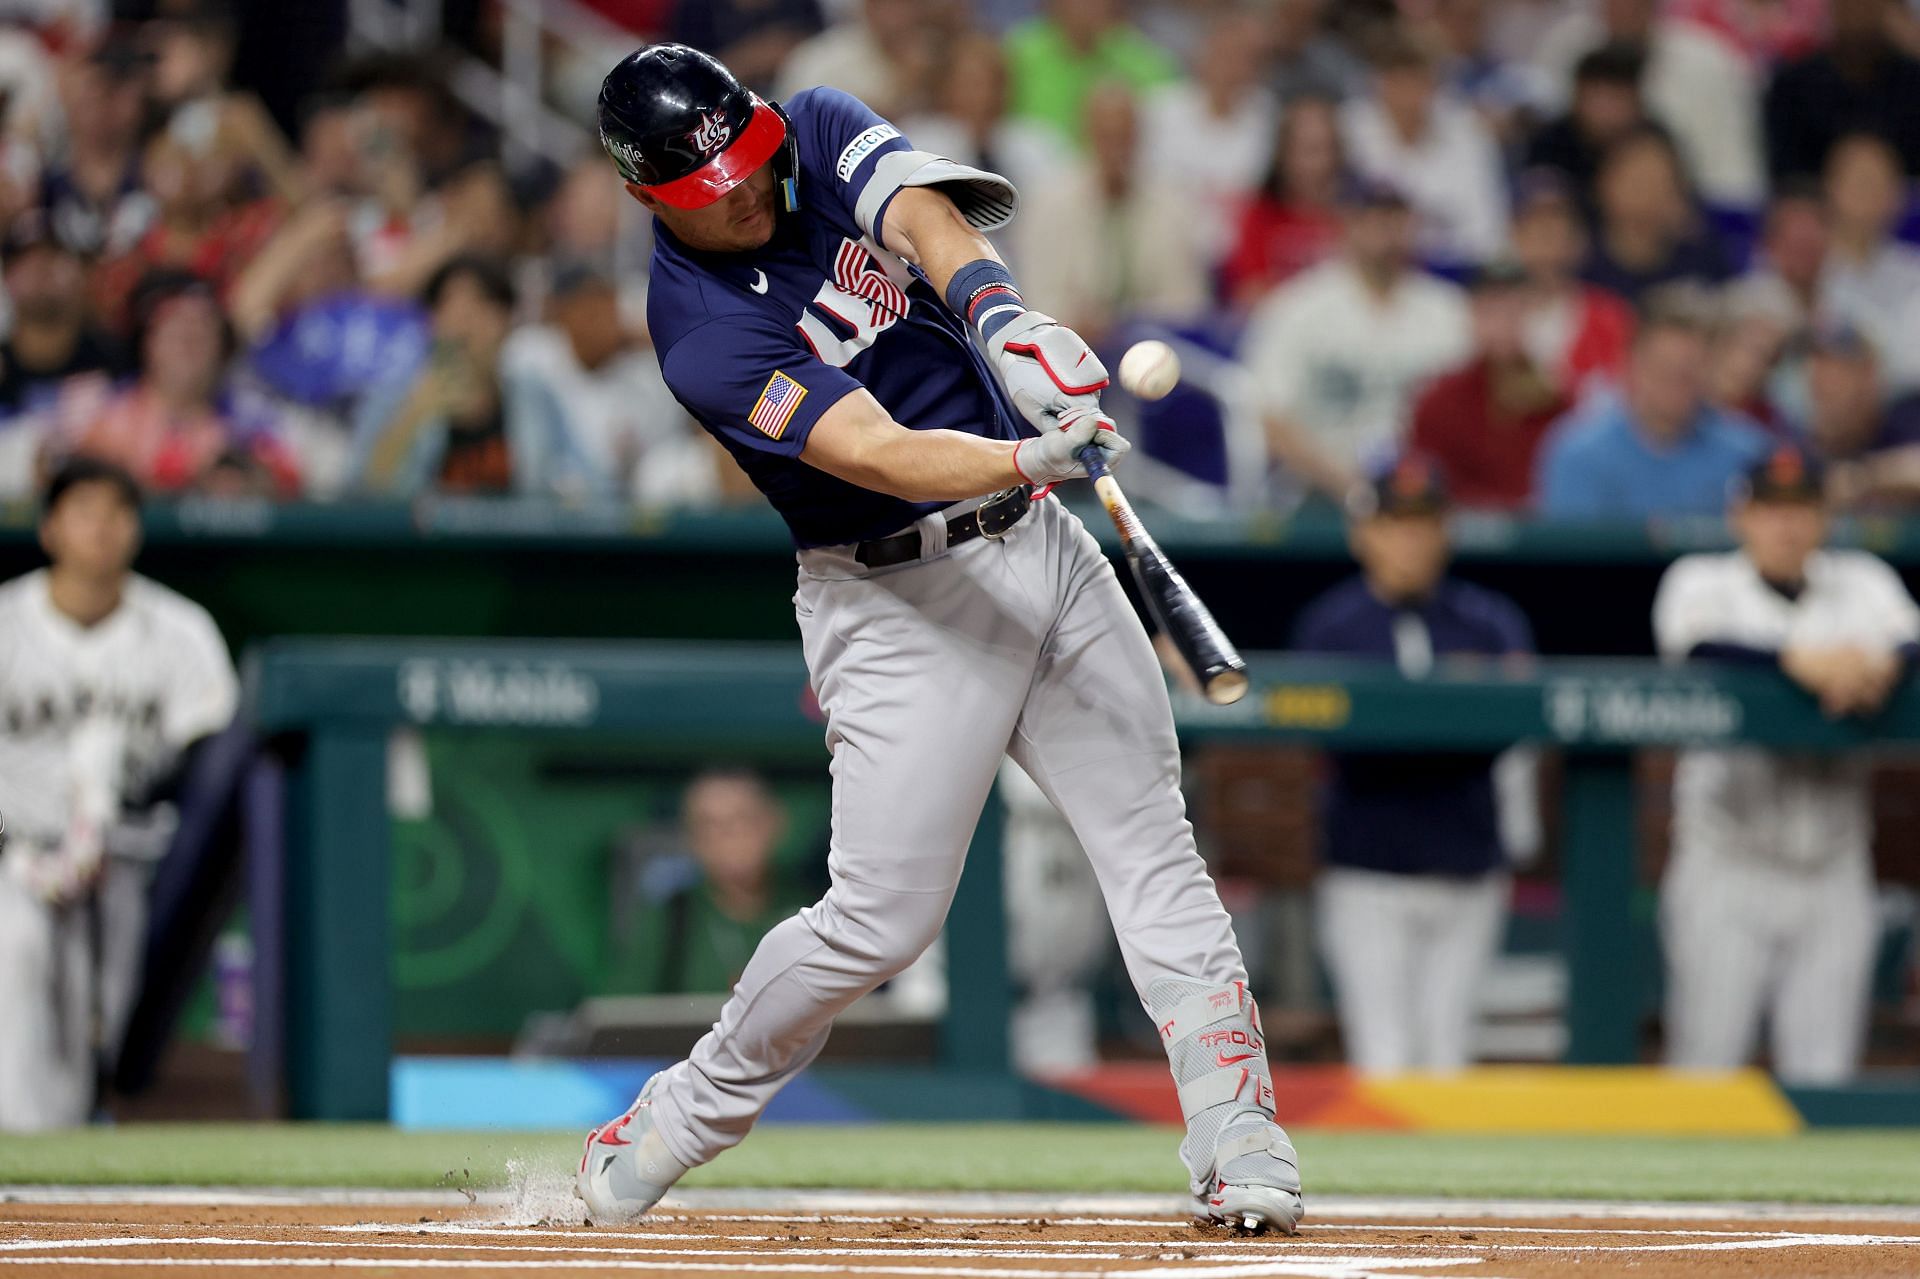 Mike Trout of Team USA hits a double in the first inning against Team Japan.